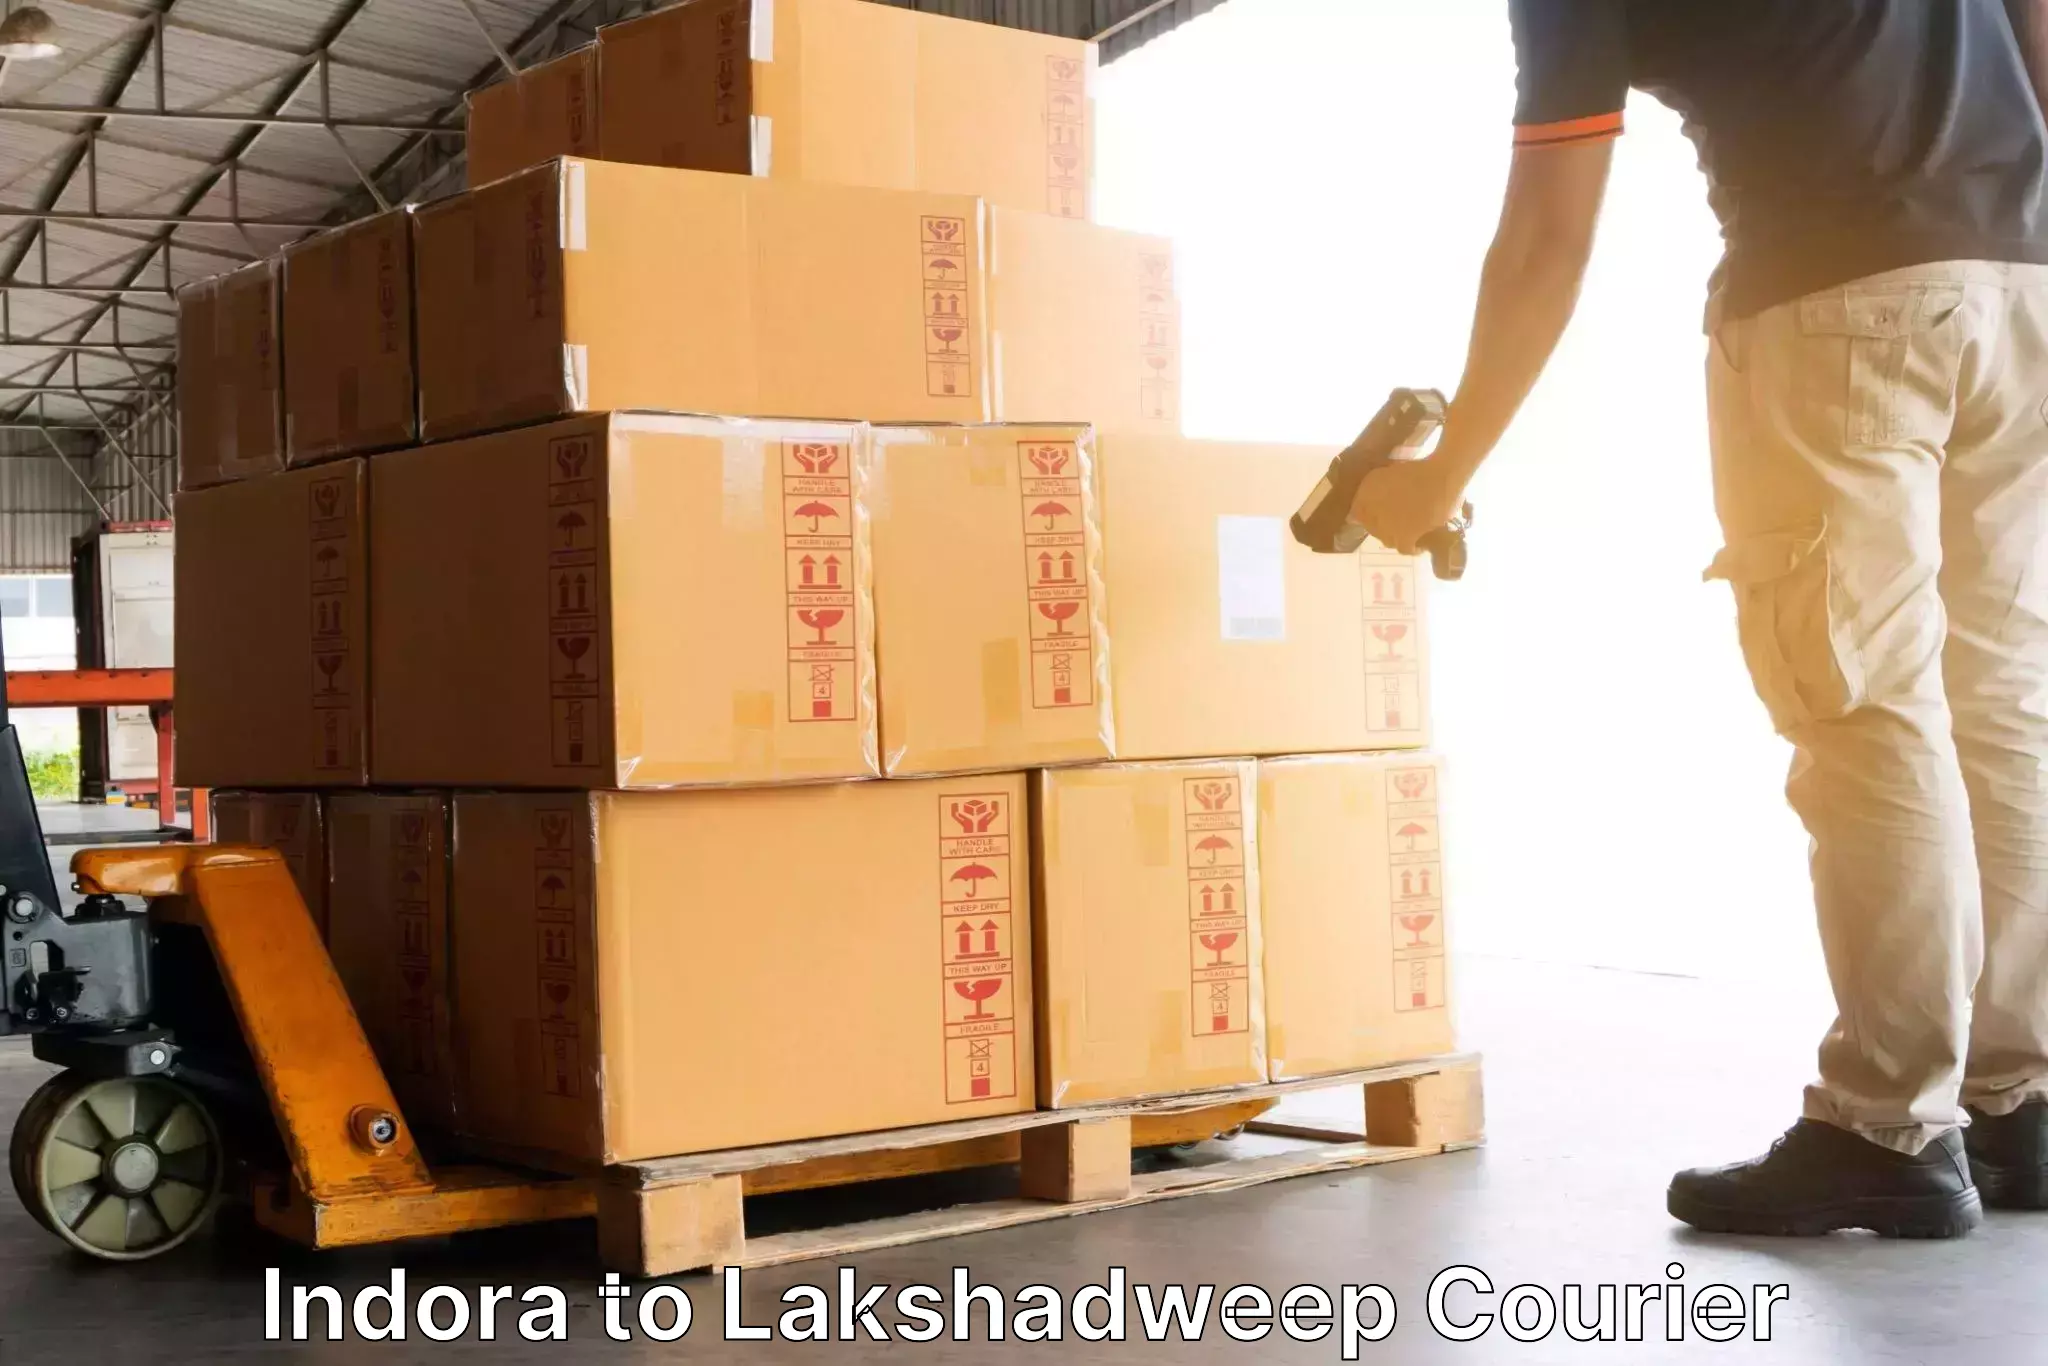 Seamless shipping experience Indora to Lakshadweep